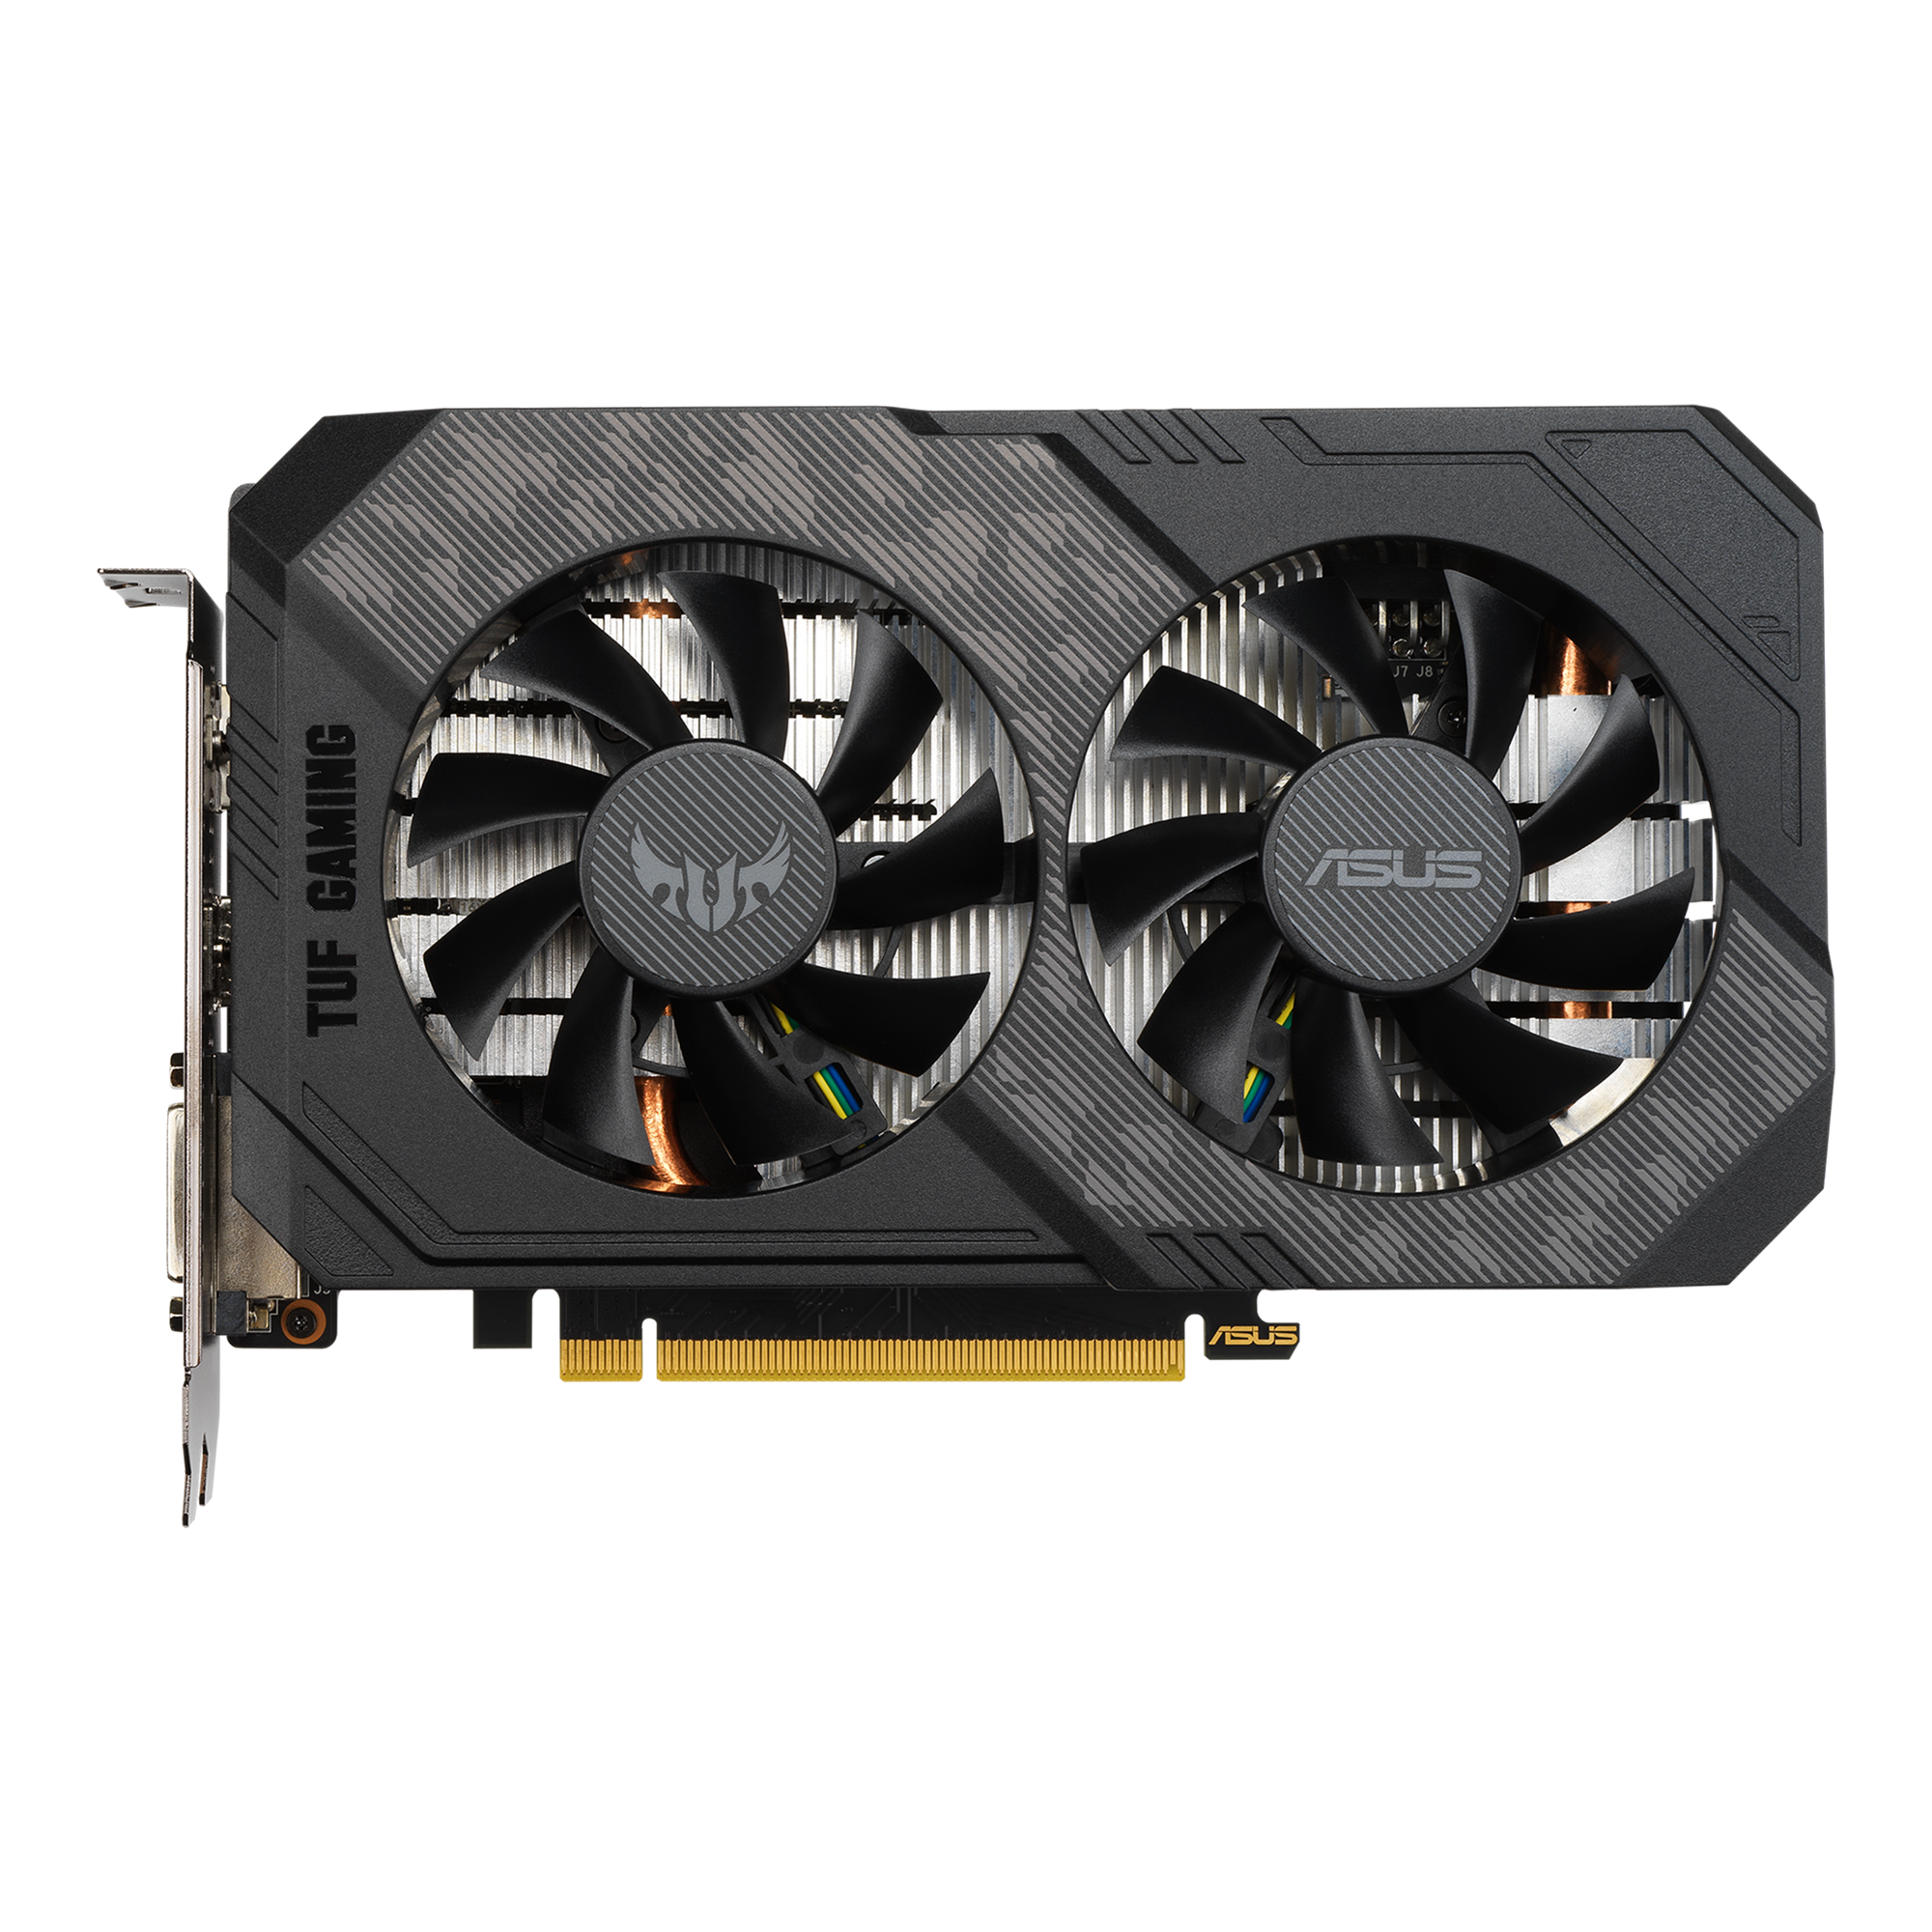 TUF-GTX1660S-O6G-GAMING｜Graphics Cards｜ASUS Global